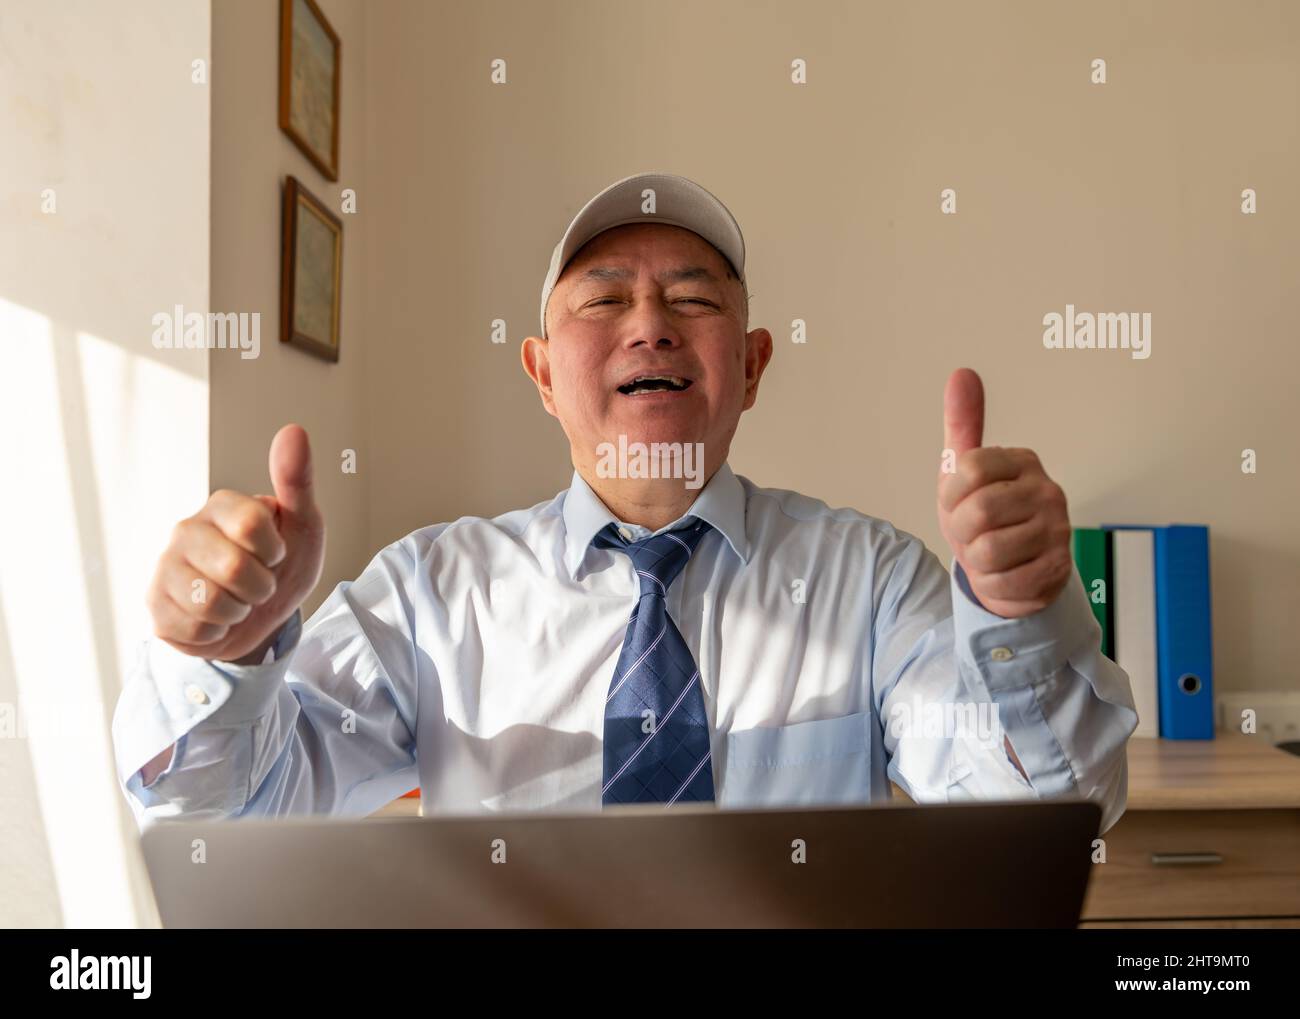 A senior executive in the office giving the thumbs up sign with a big smile after closing a big deal on line. Stock Photo